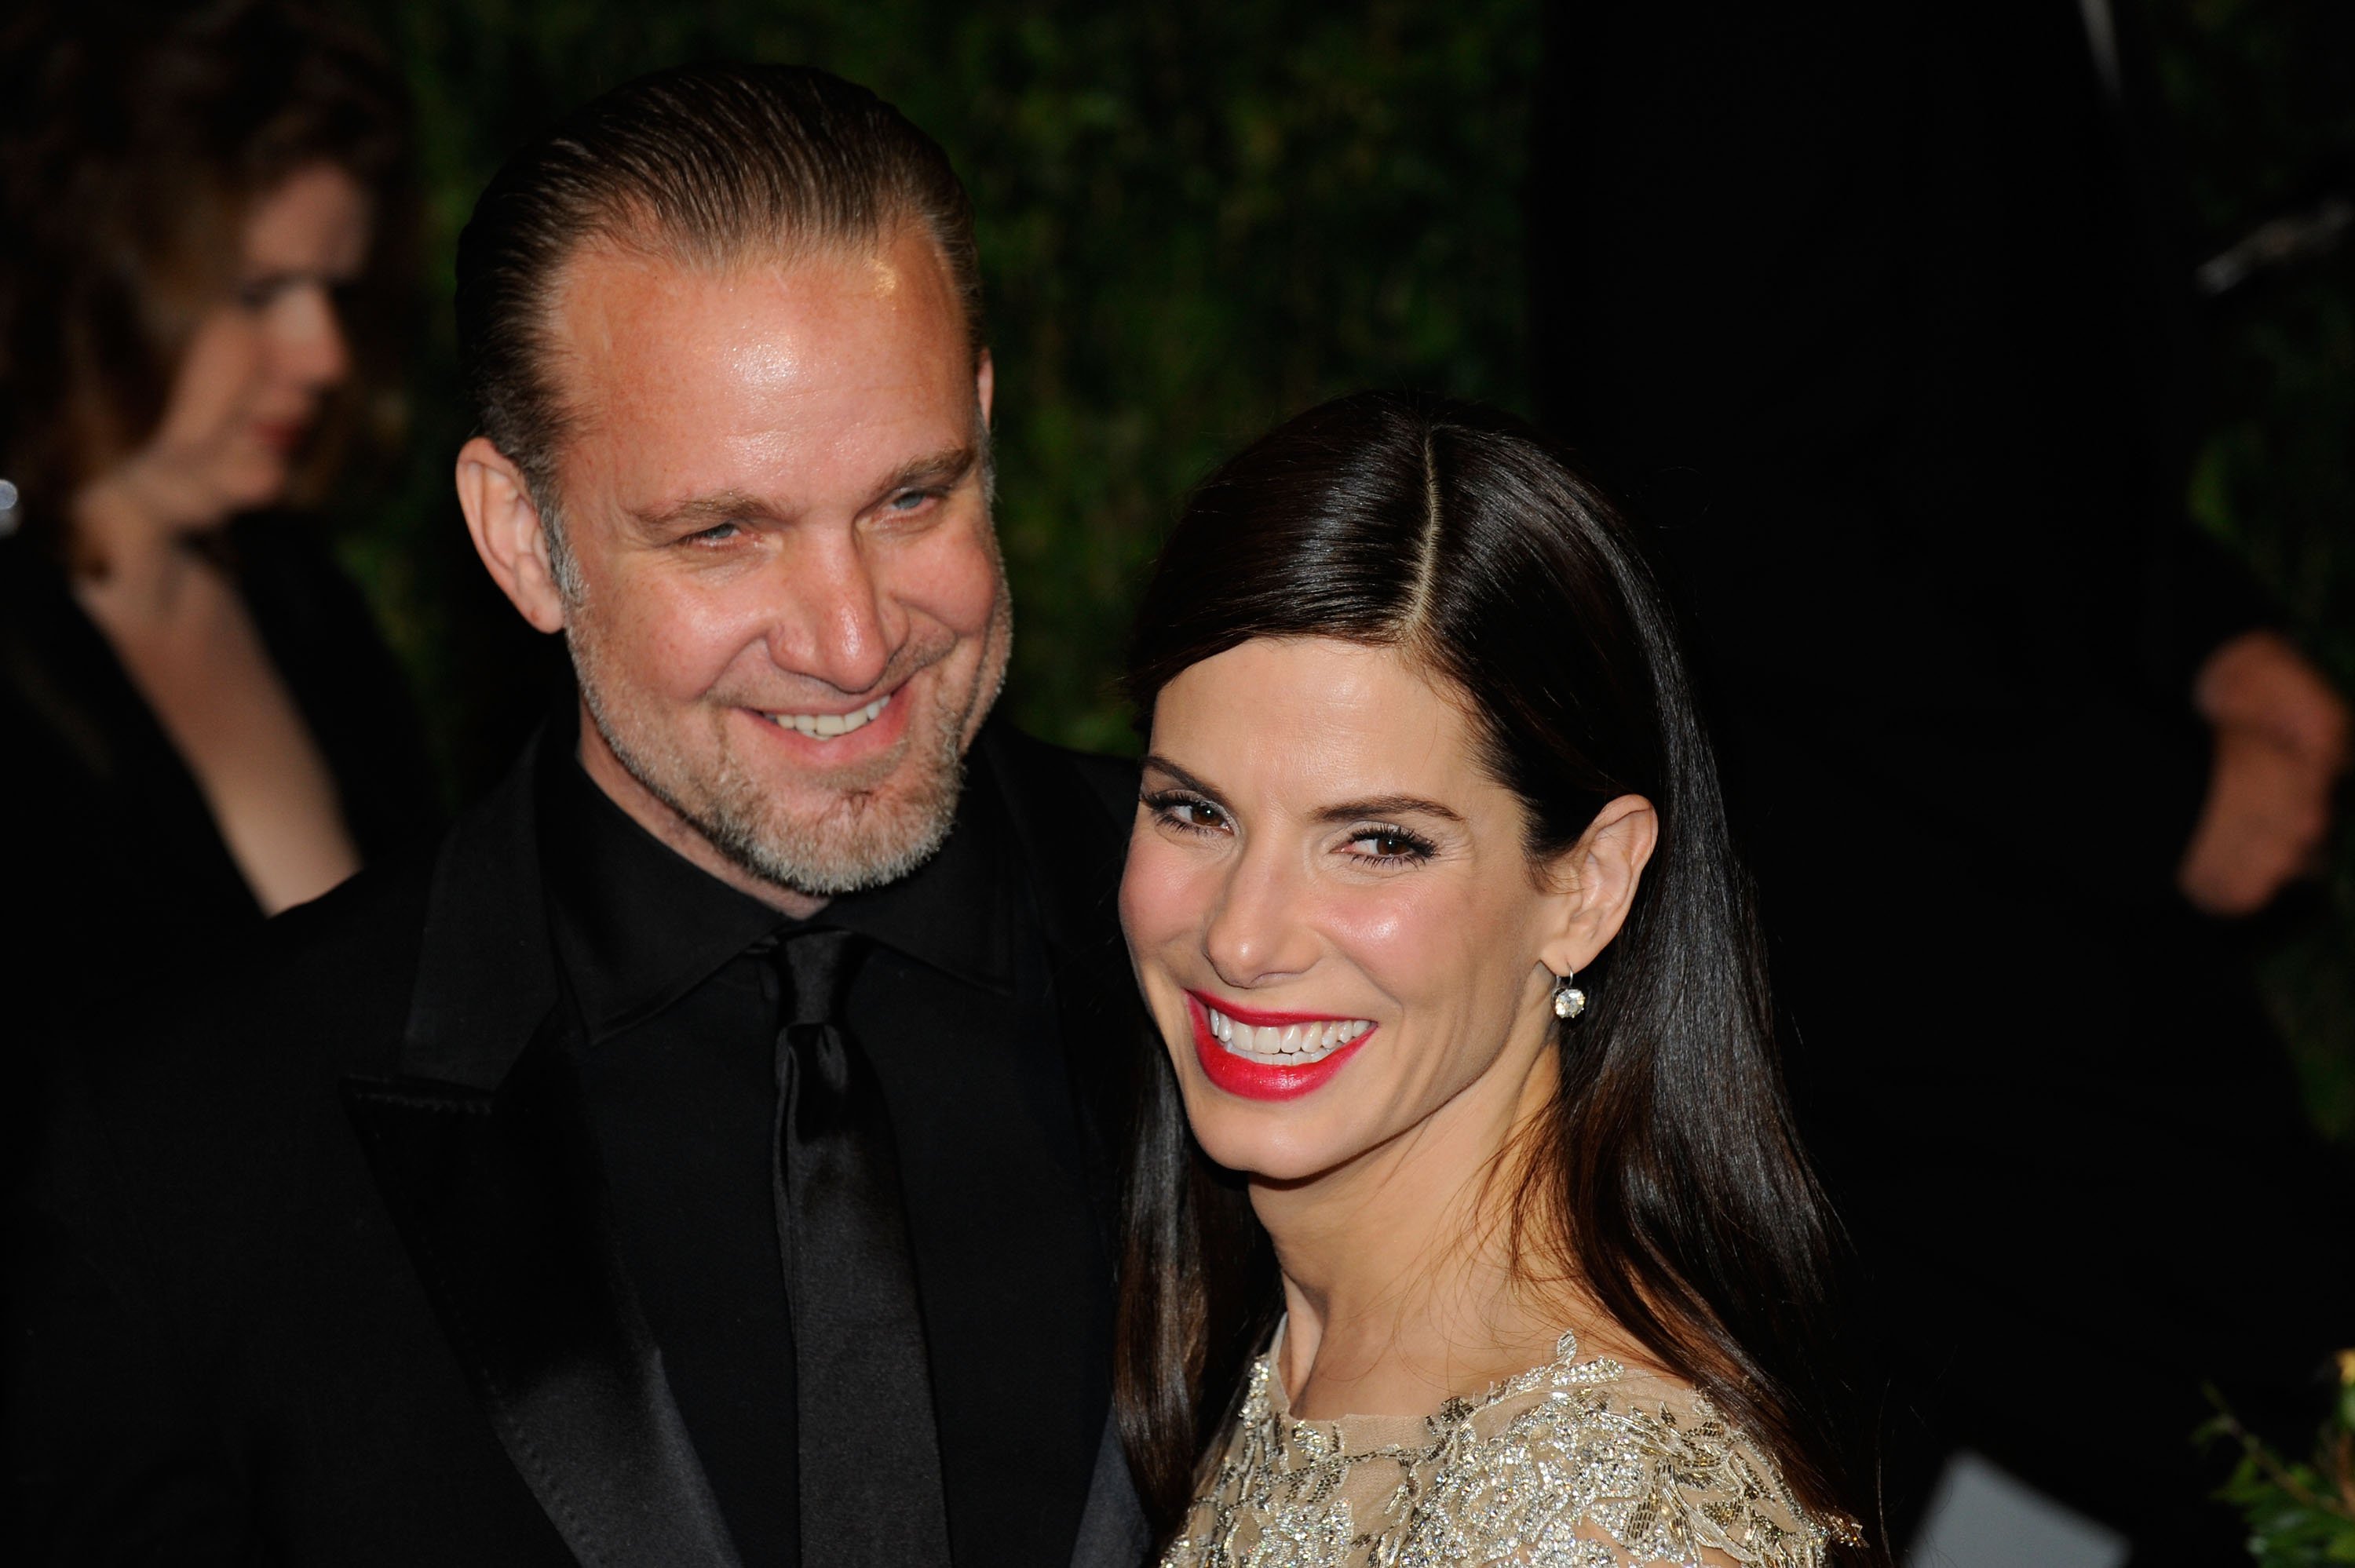 Jesse James and Sandra Bullock at the Vanity Fair Oscar Party on March 7, 2010, in West Hollywood, California. | Source: Getty Images